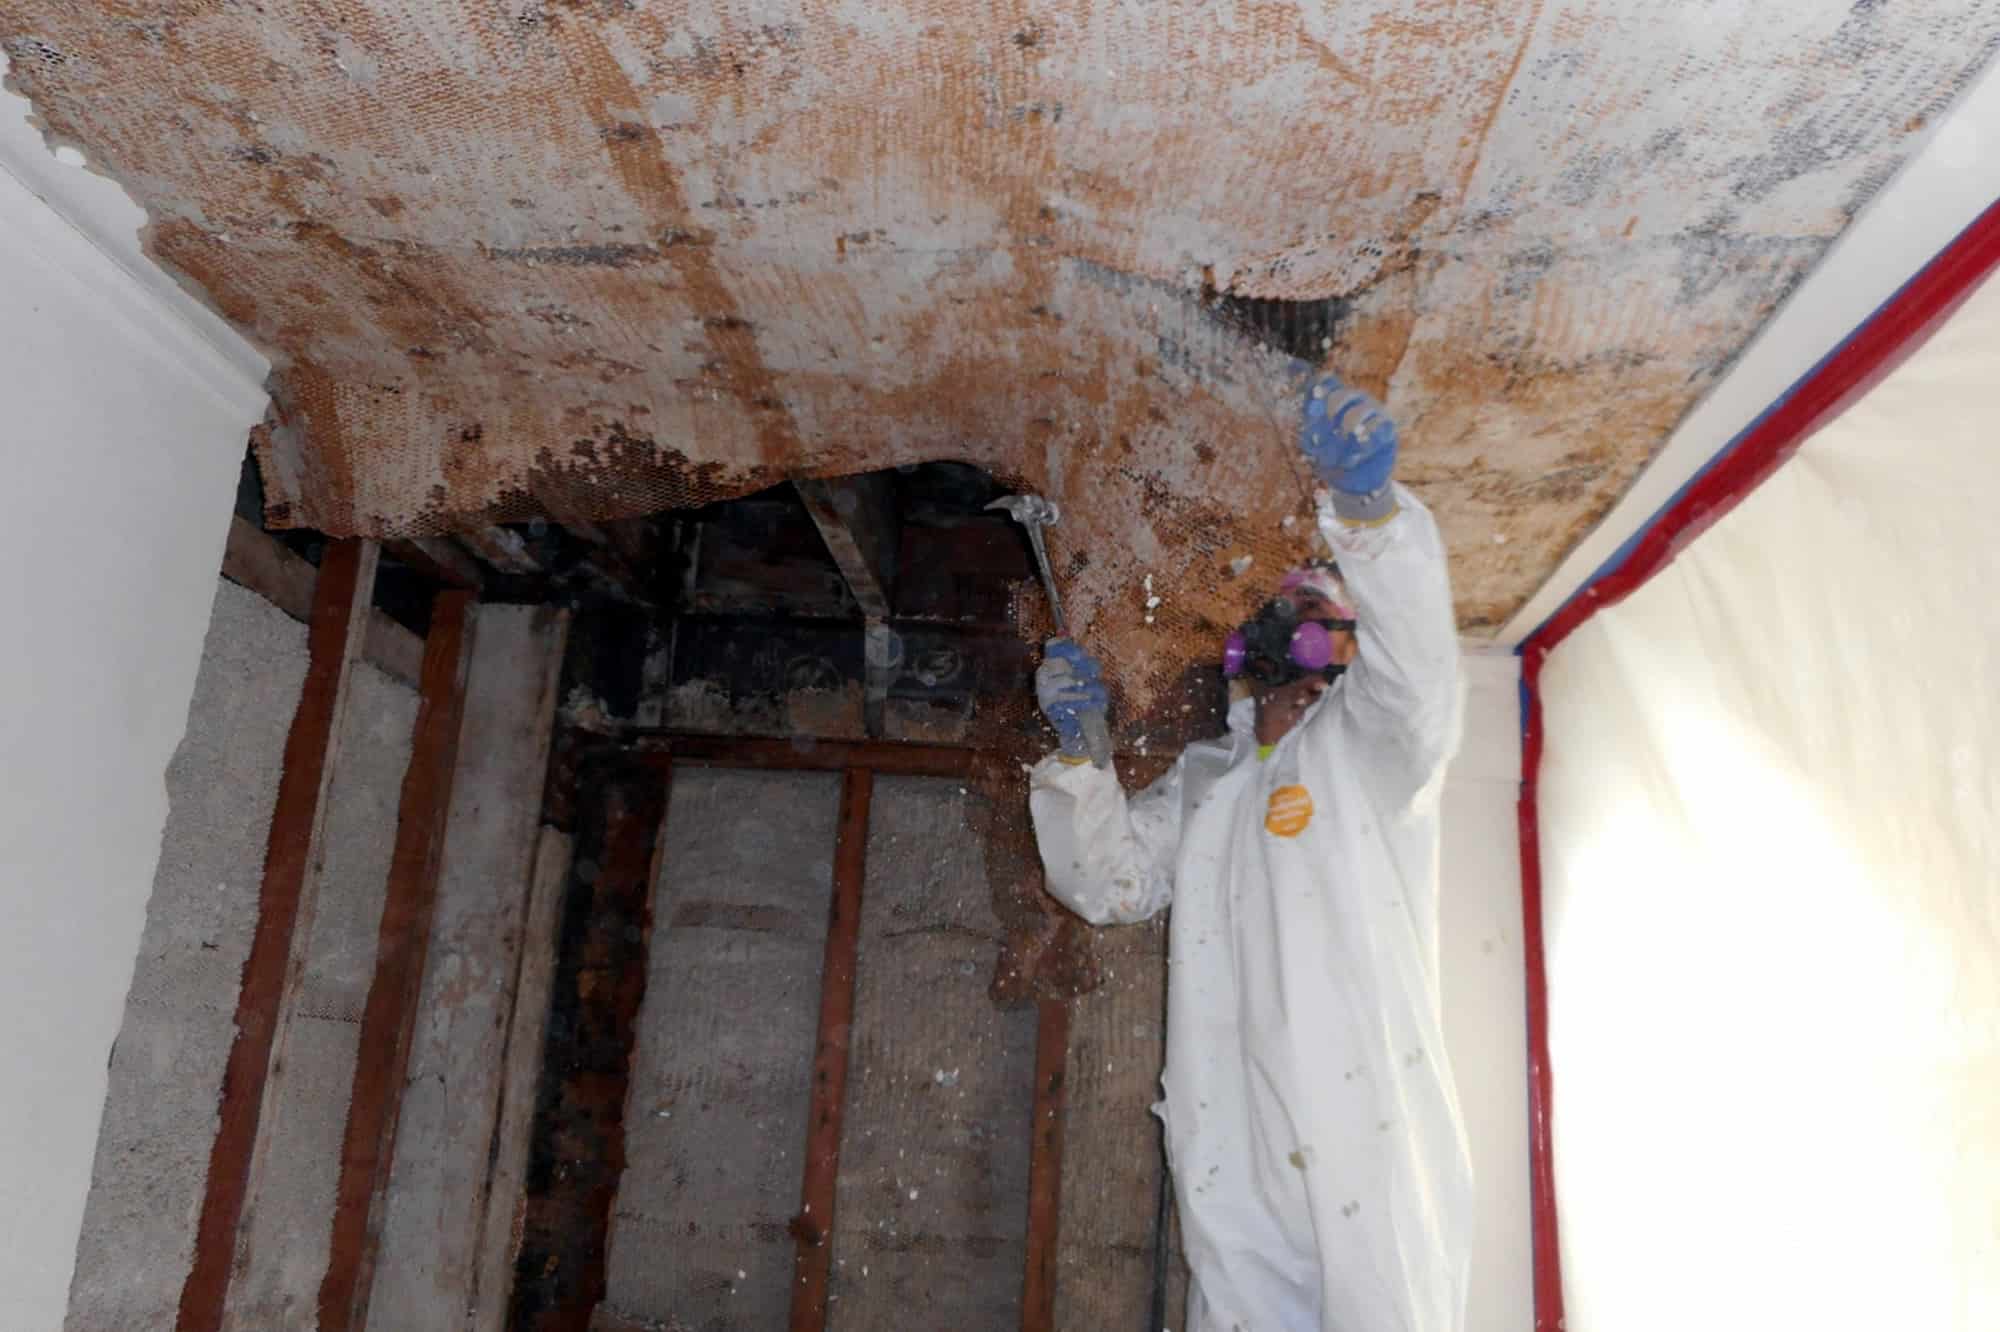 Powers Environmental specialists safely remove asbestos, which can be found in popcorn ceilings